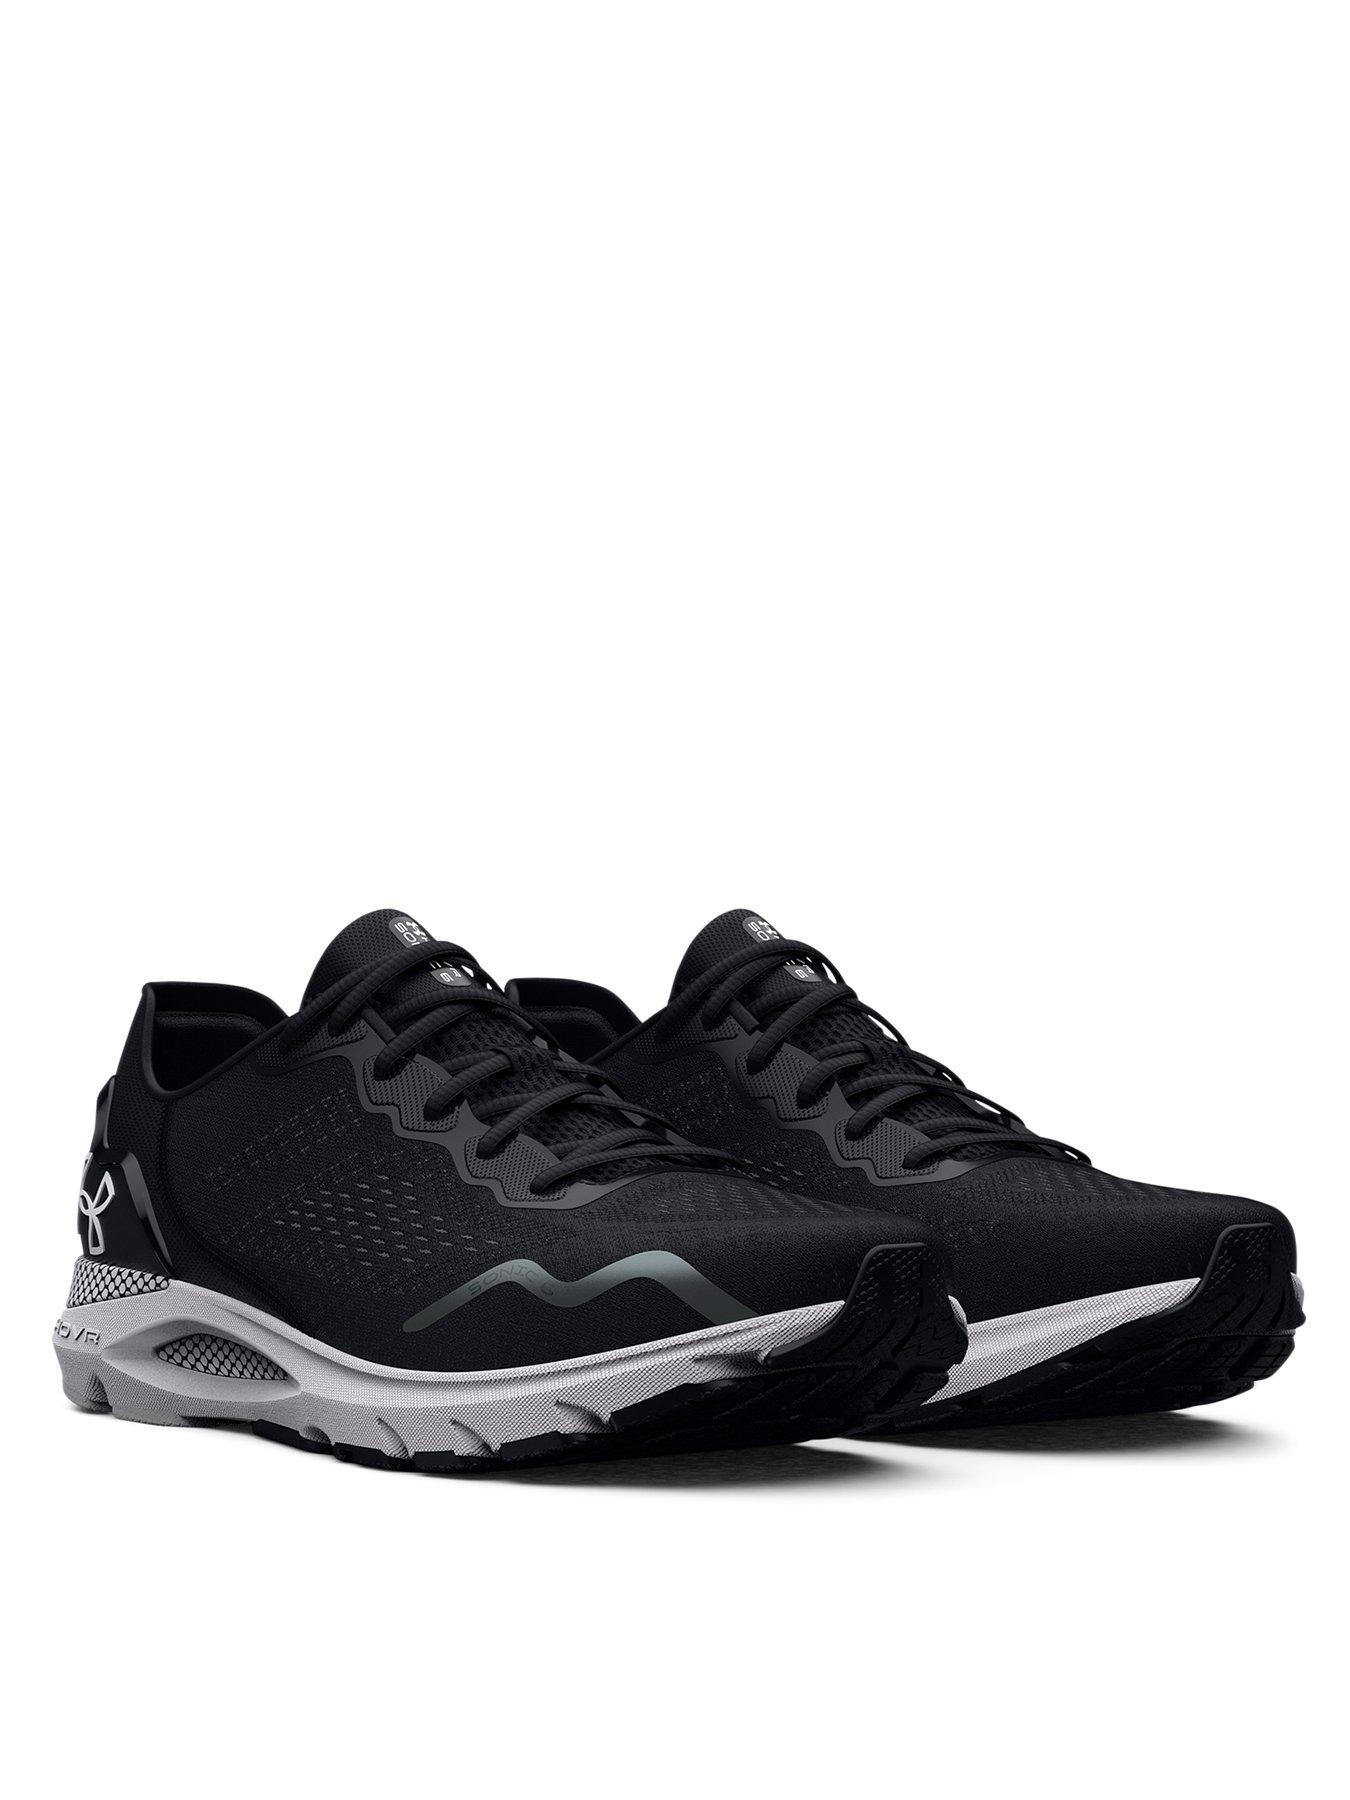 UNDER ARMOUR Mens Running HOVR Sonic 6 Trainers - Black | littlewoods.com